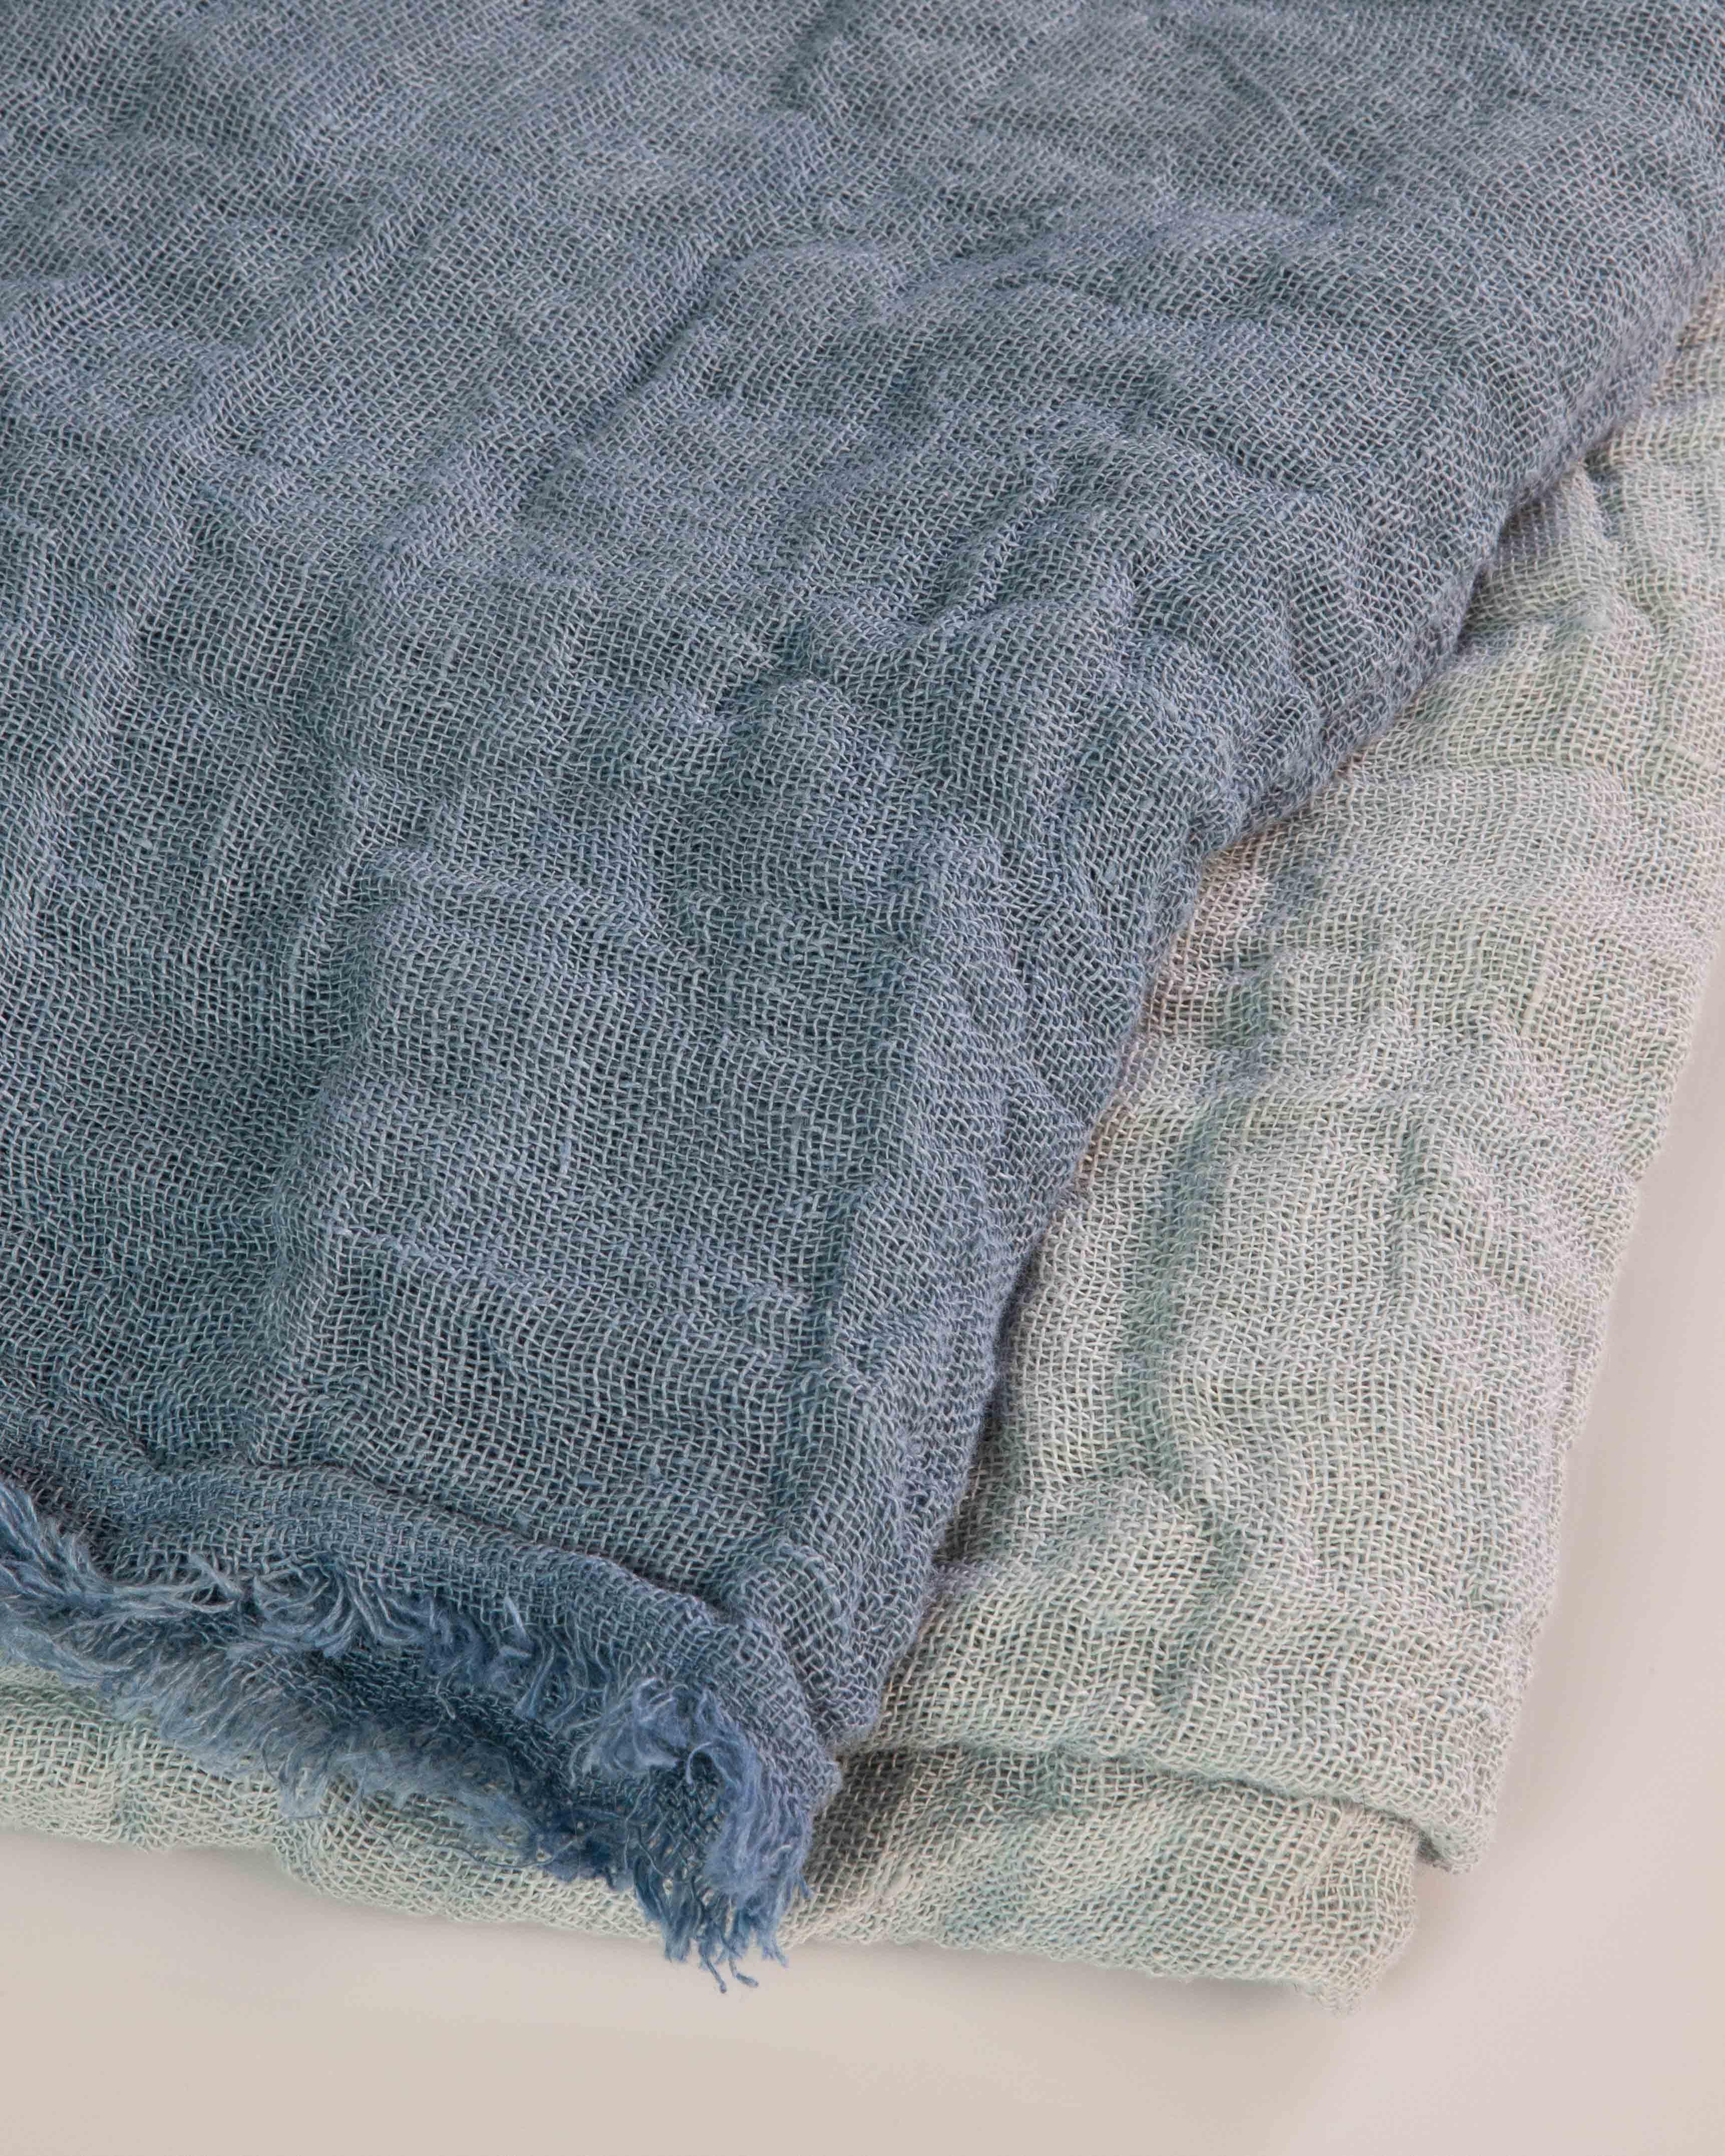 Hand Painted Open-Weave Linen Throw in Blue Tones, in Stock In New Condition For Sale In West Hollywood, CA